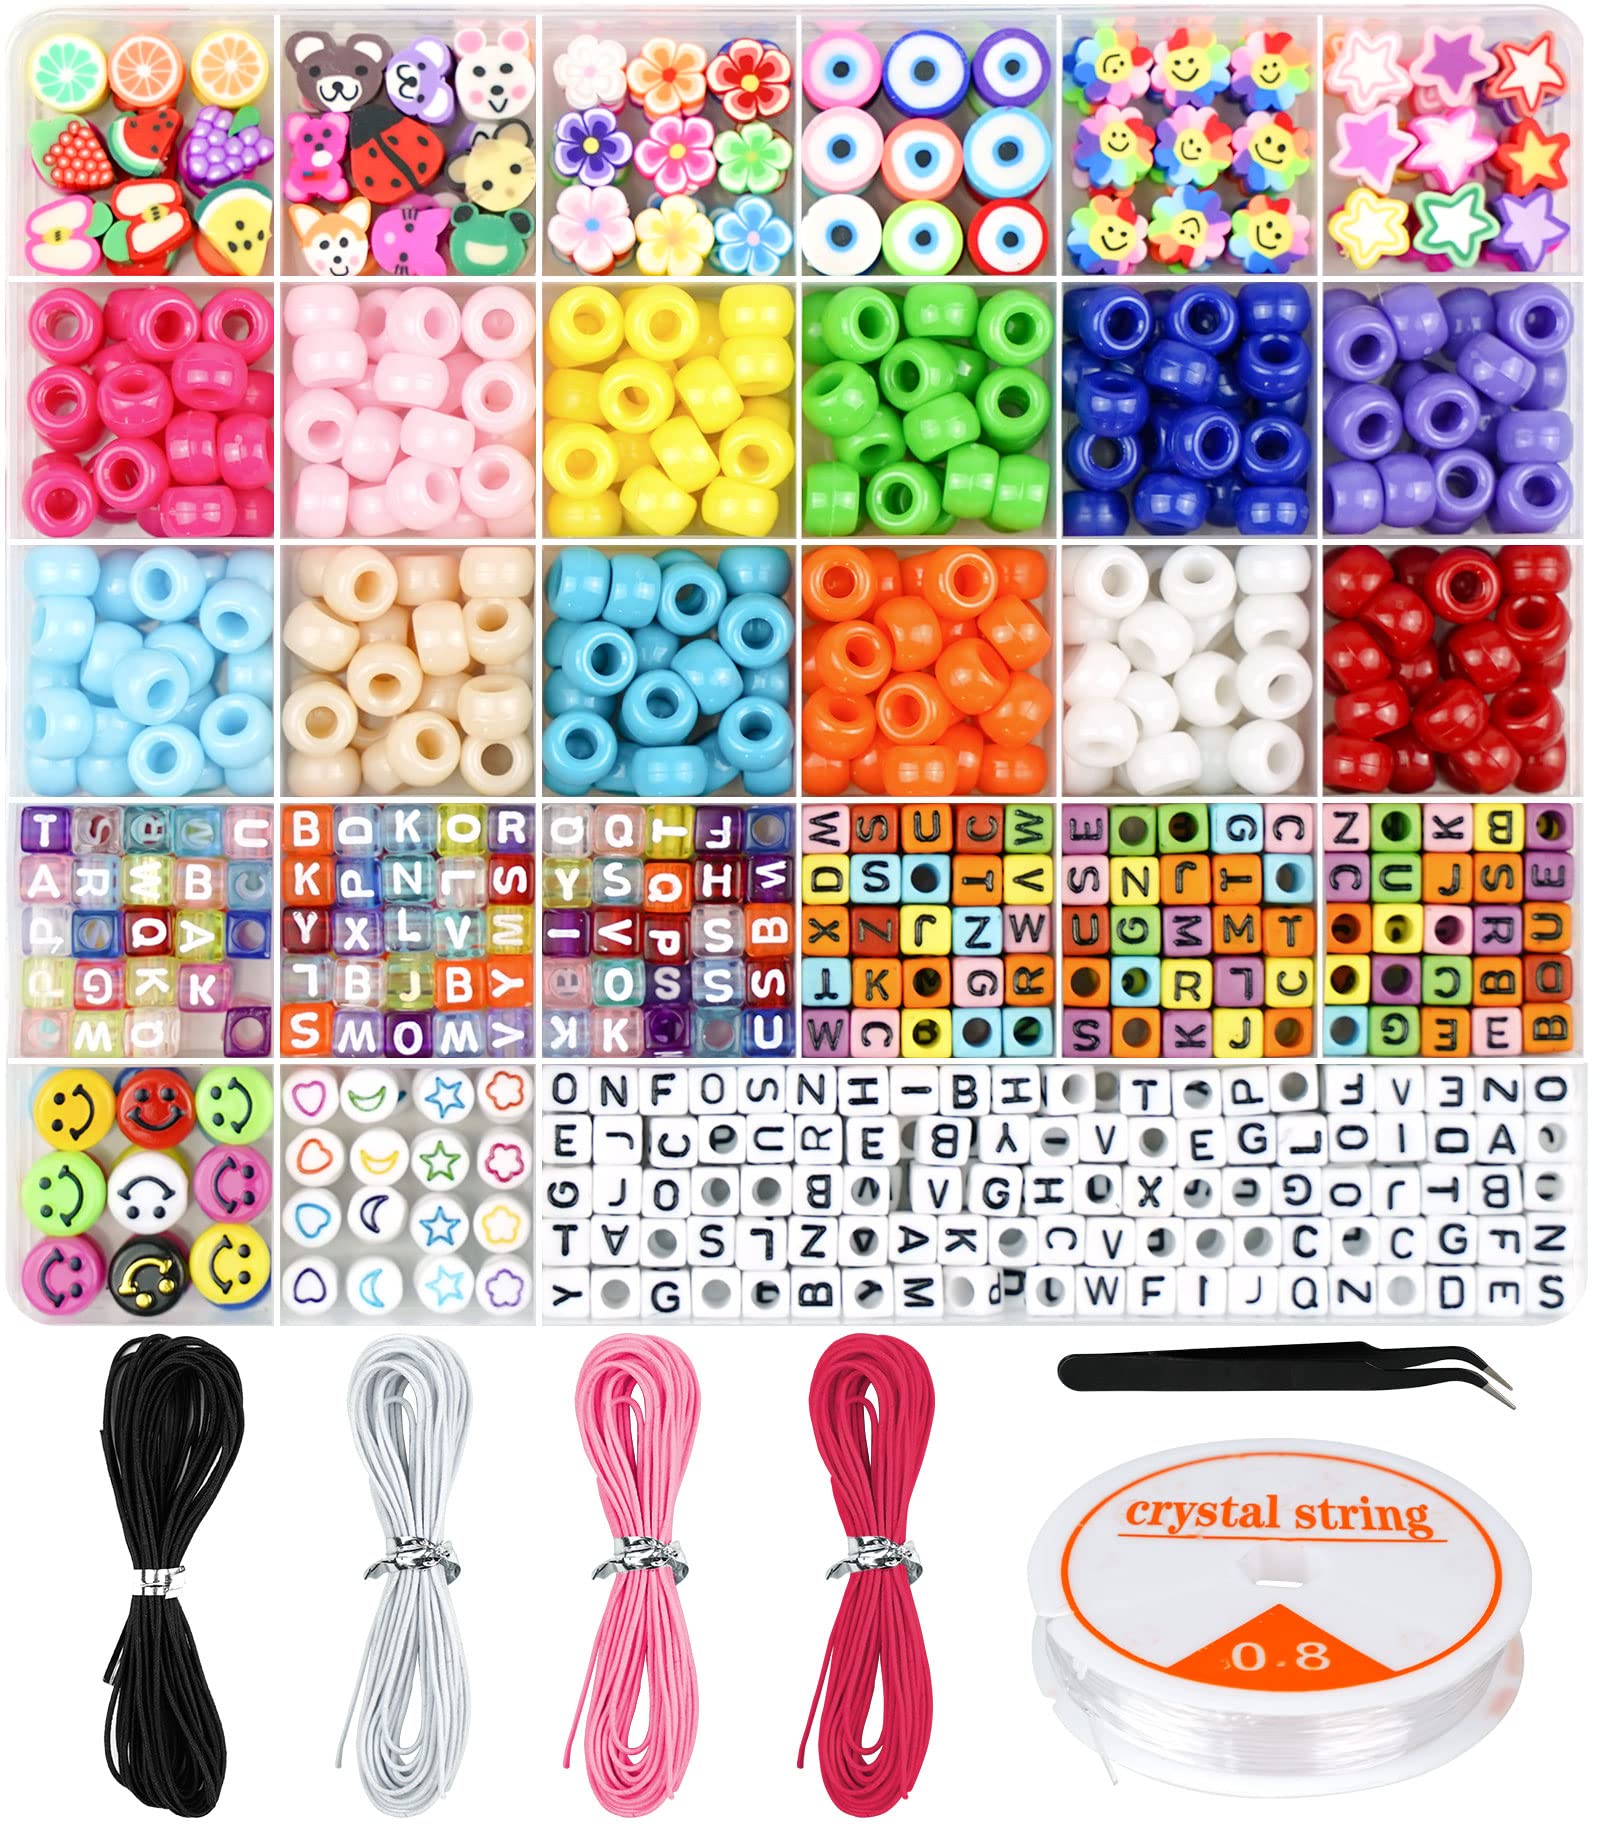 5000 Pcs Clay Beads Bracelet Making Kit, 24colors Friendship Bracelet Kit  Flat Polymer Heishi Beads For Jewelry Making With Letter Beads And Charms,  C